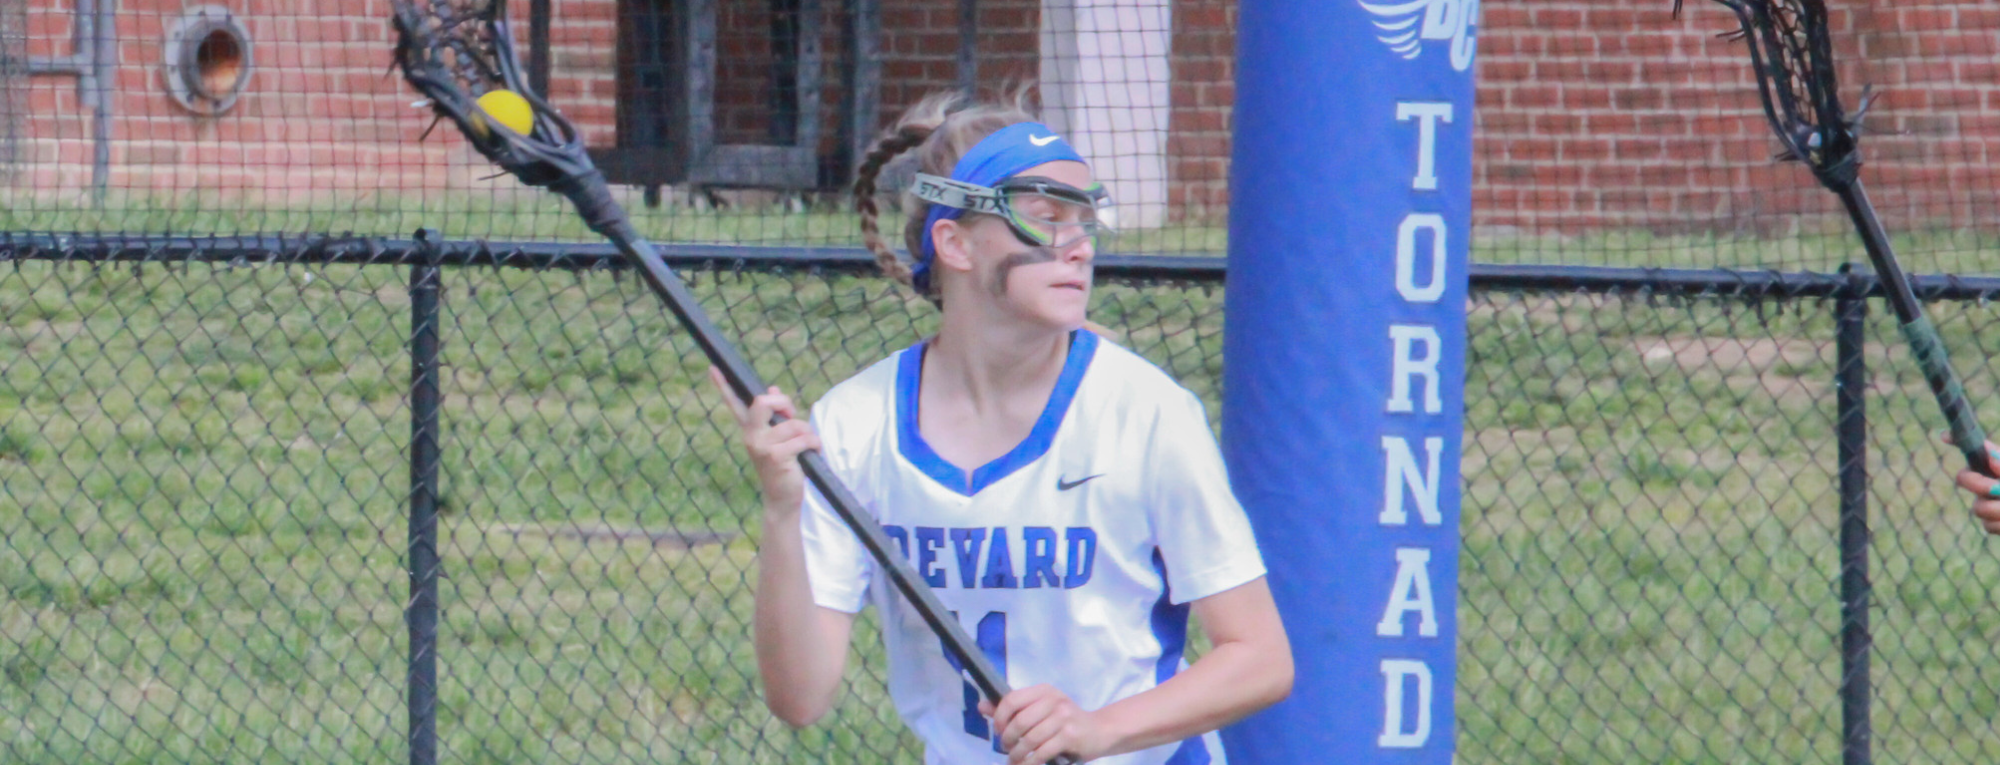 Brevard Takes 12-10 Victory over Ferrum in Thriller at Home